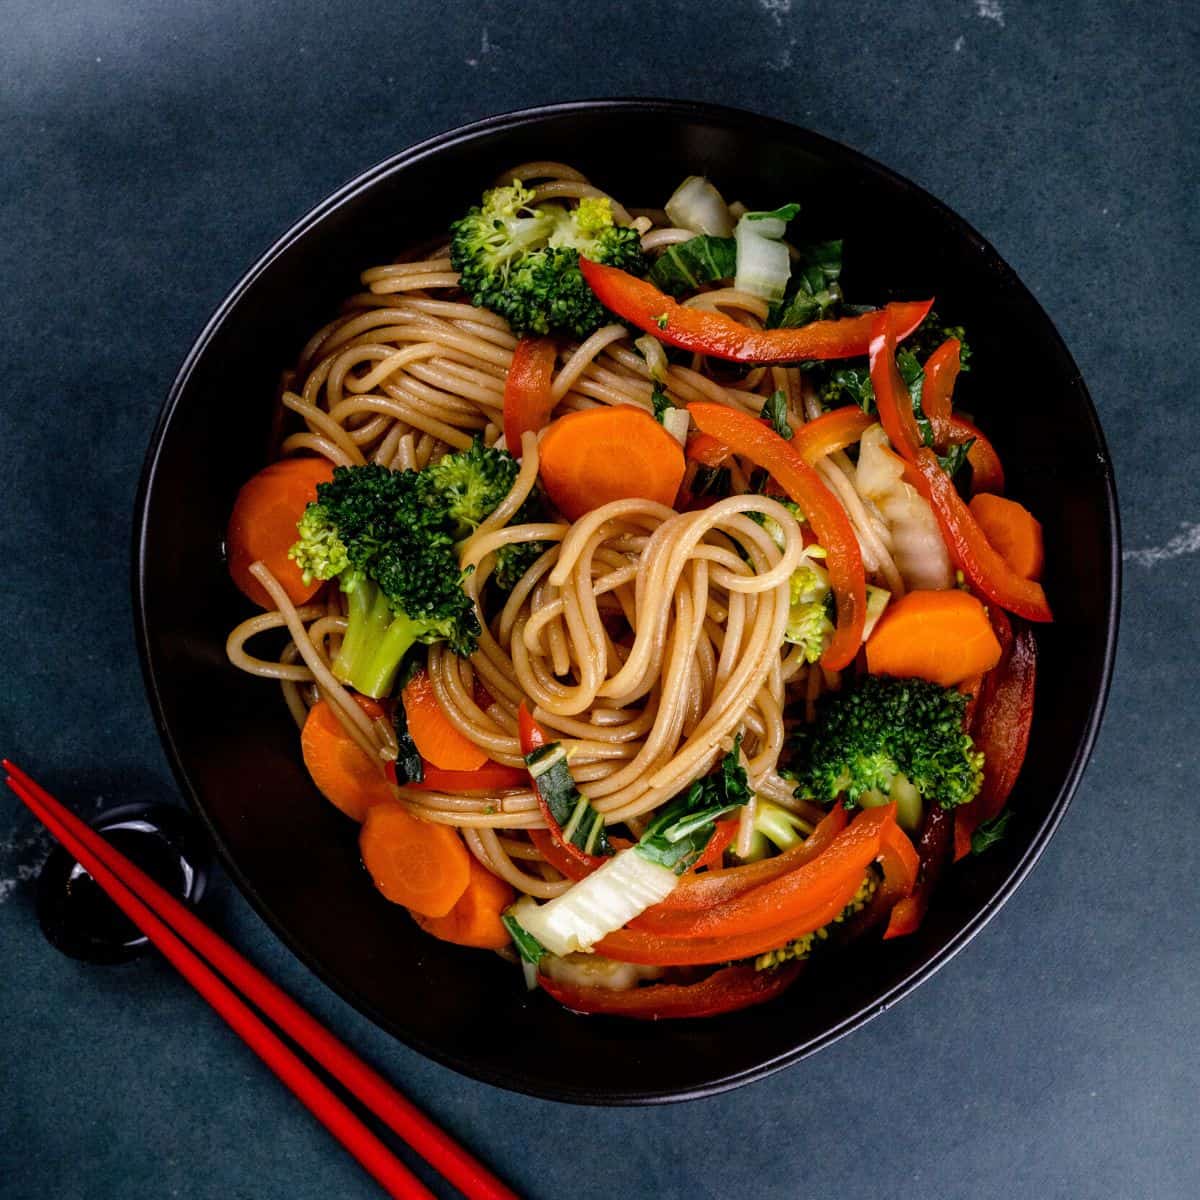 A dark bowl is filled with veggie lo mein. The noodles are swirled in the bowl with lots of veggies in them. A pair of red chopsticks are next to the bowl. It is resting on a dark marble surface.